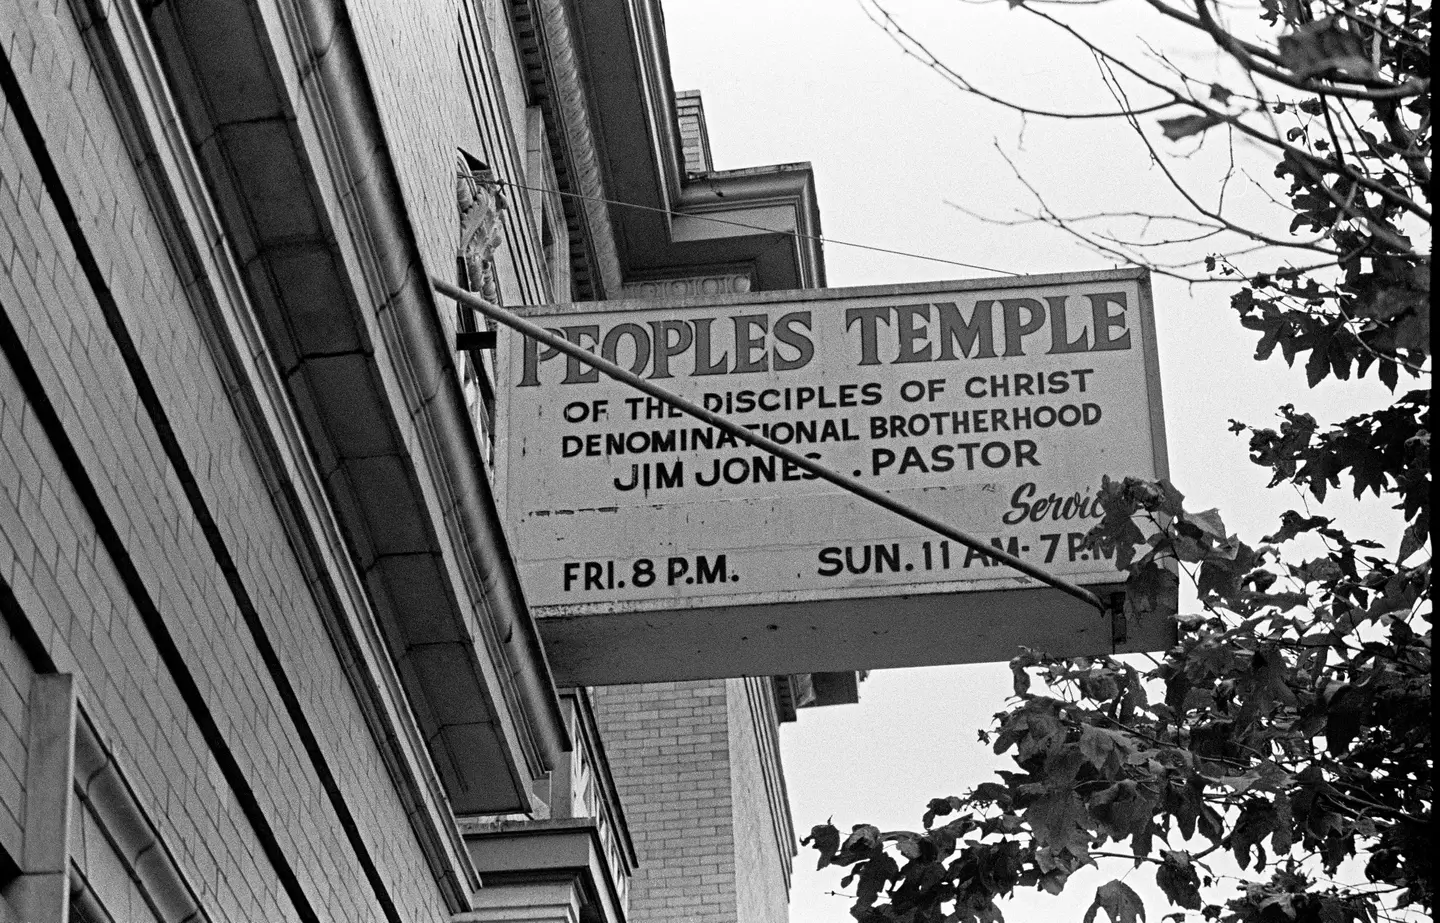 Jim Jones started the People's Temple in 1955.